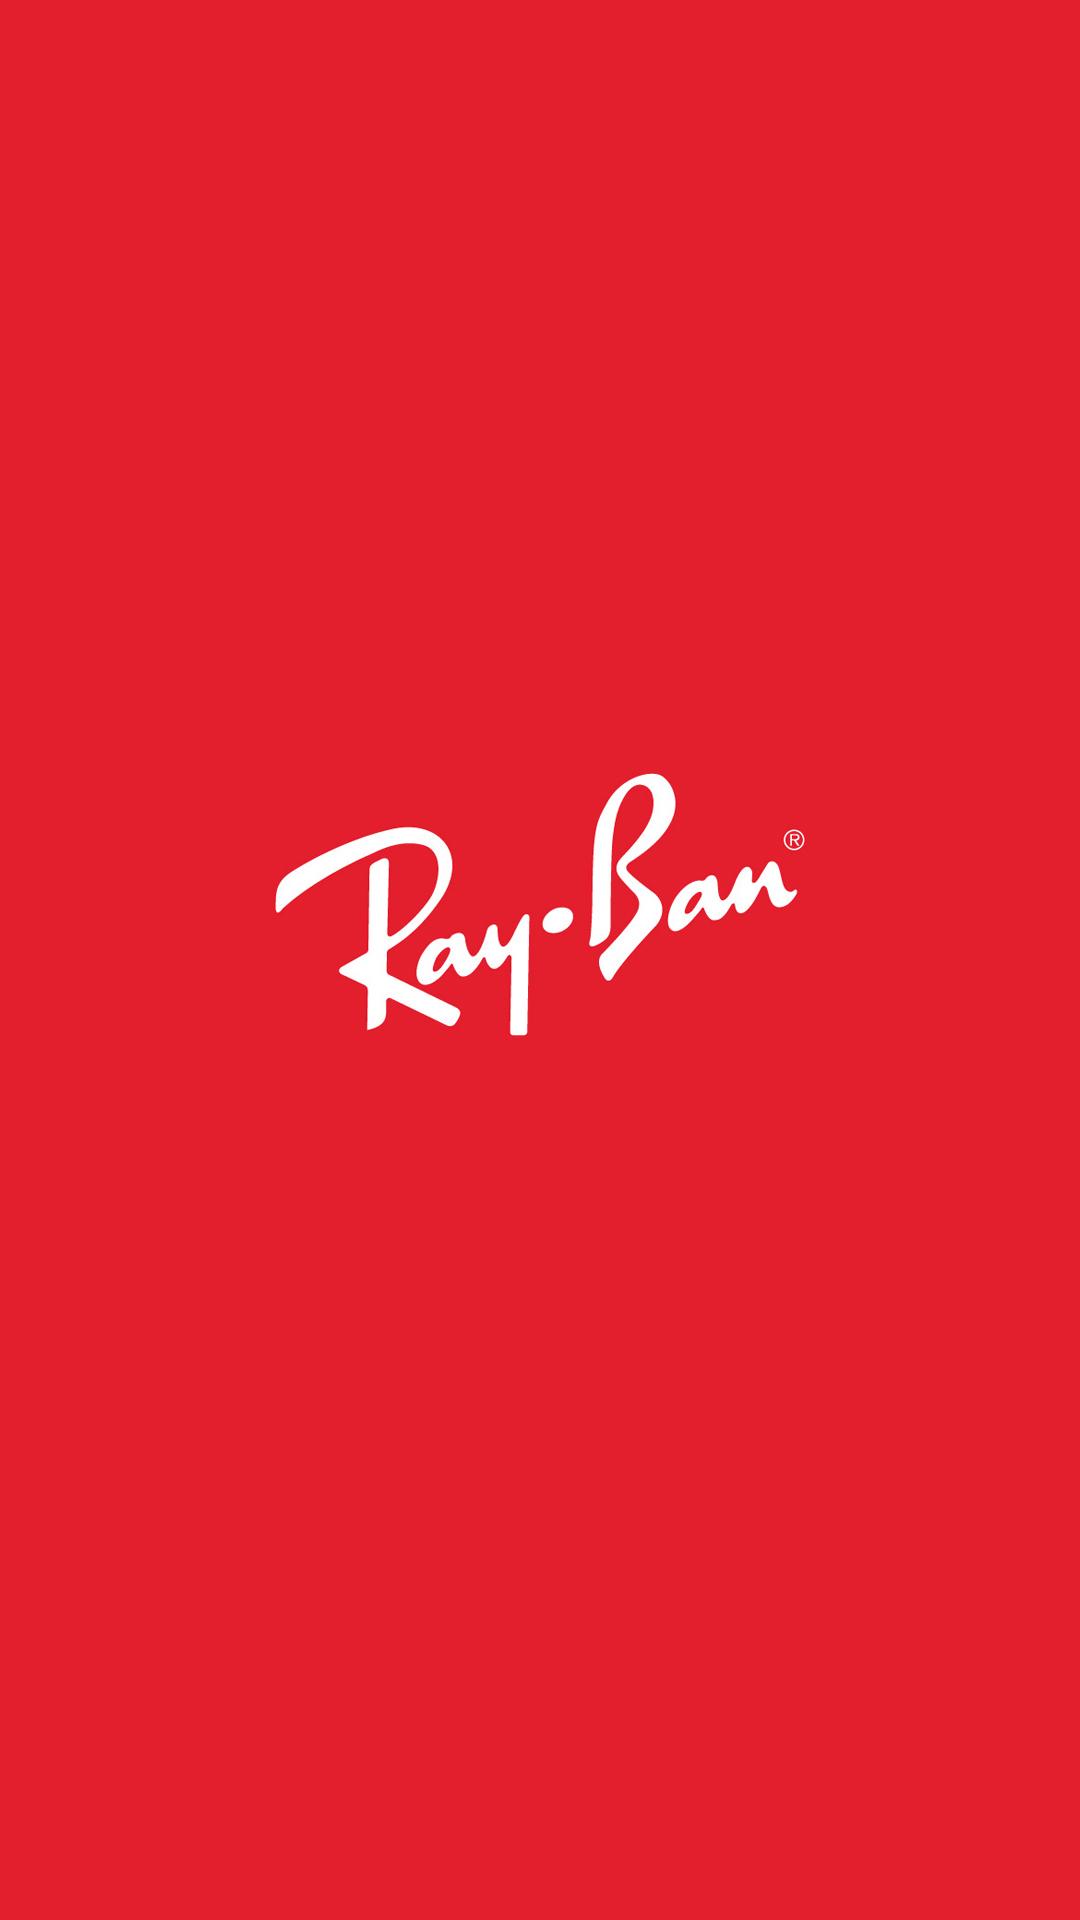 Ray Ban Red Logo Android Wallpaper free download